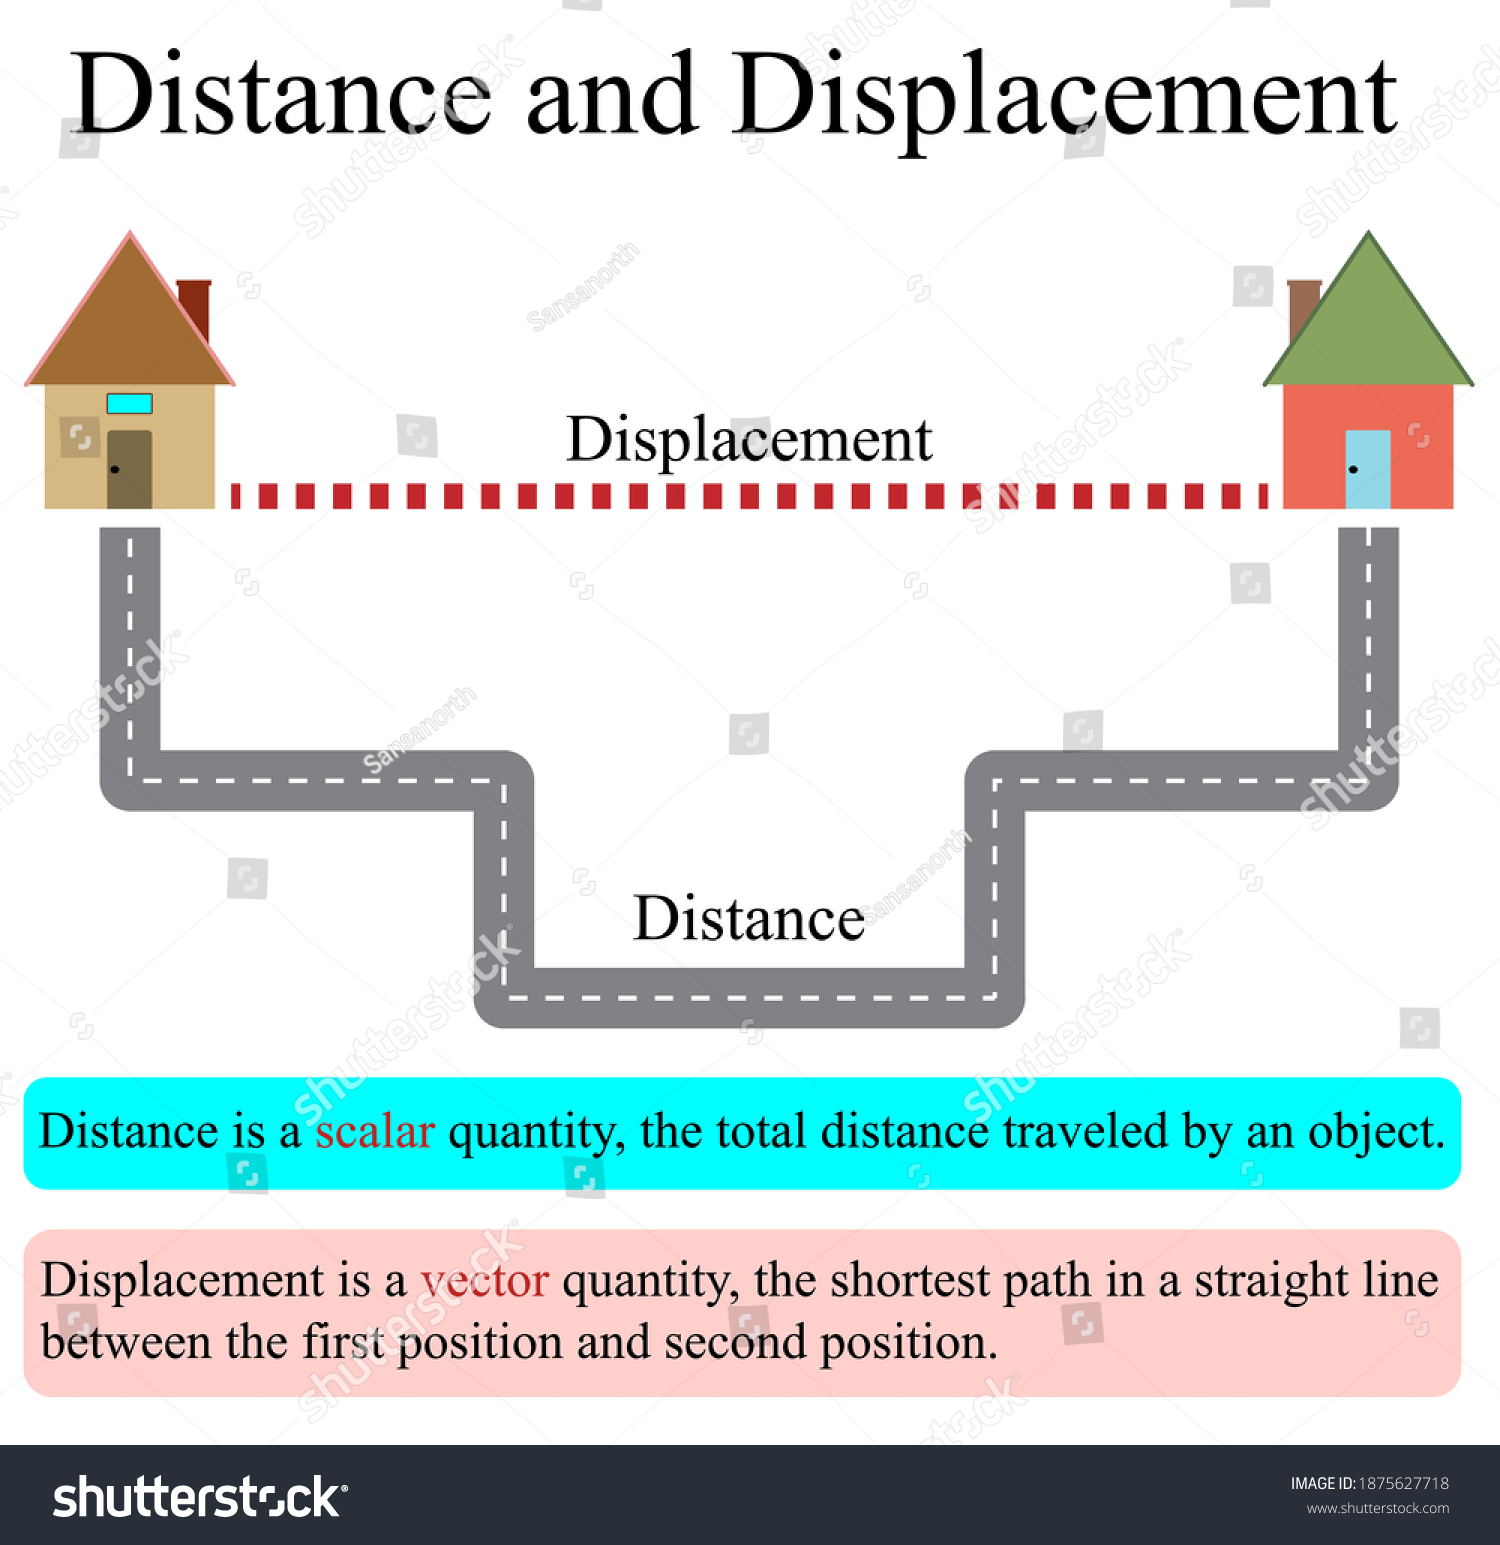 Difference between distance and displacement with diagrams banks that accept bitcoin transactions